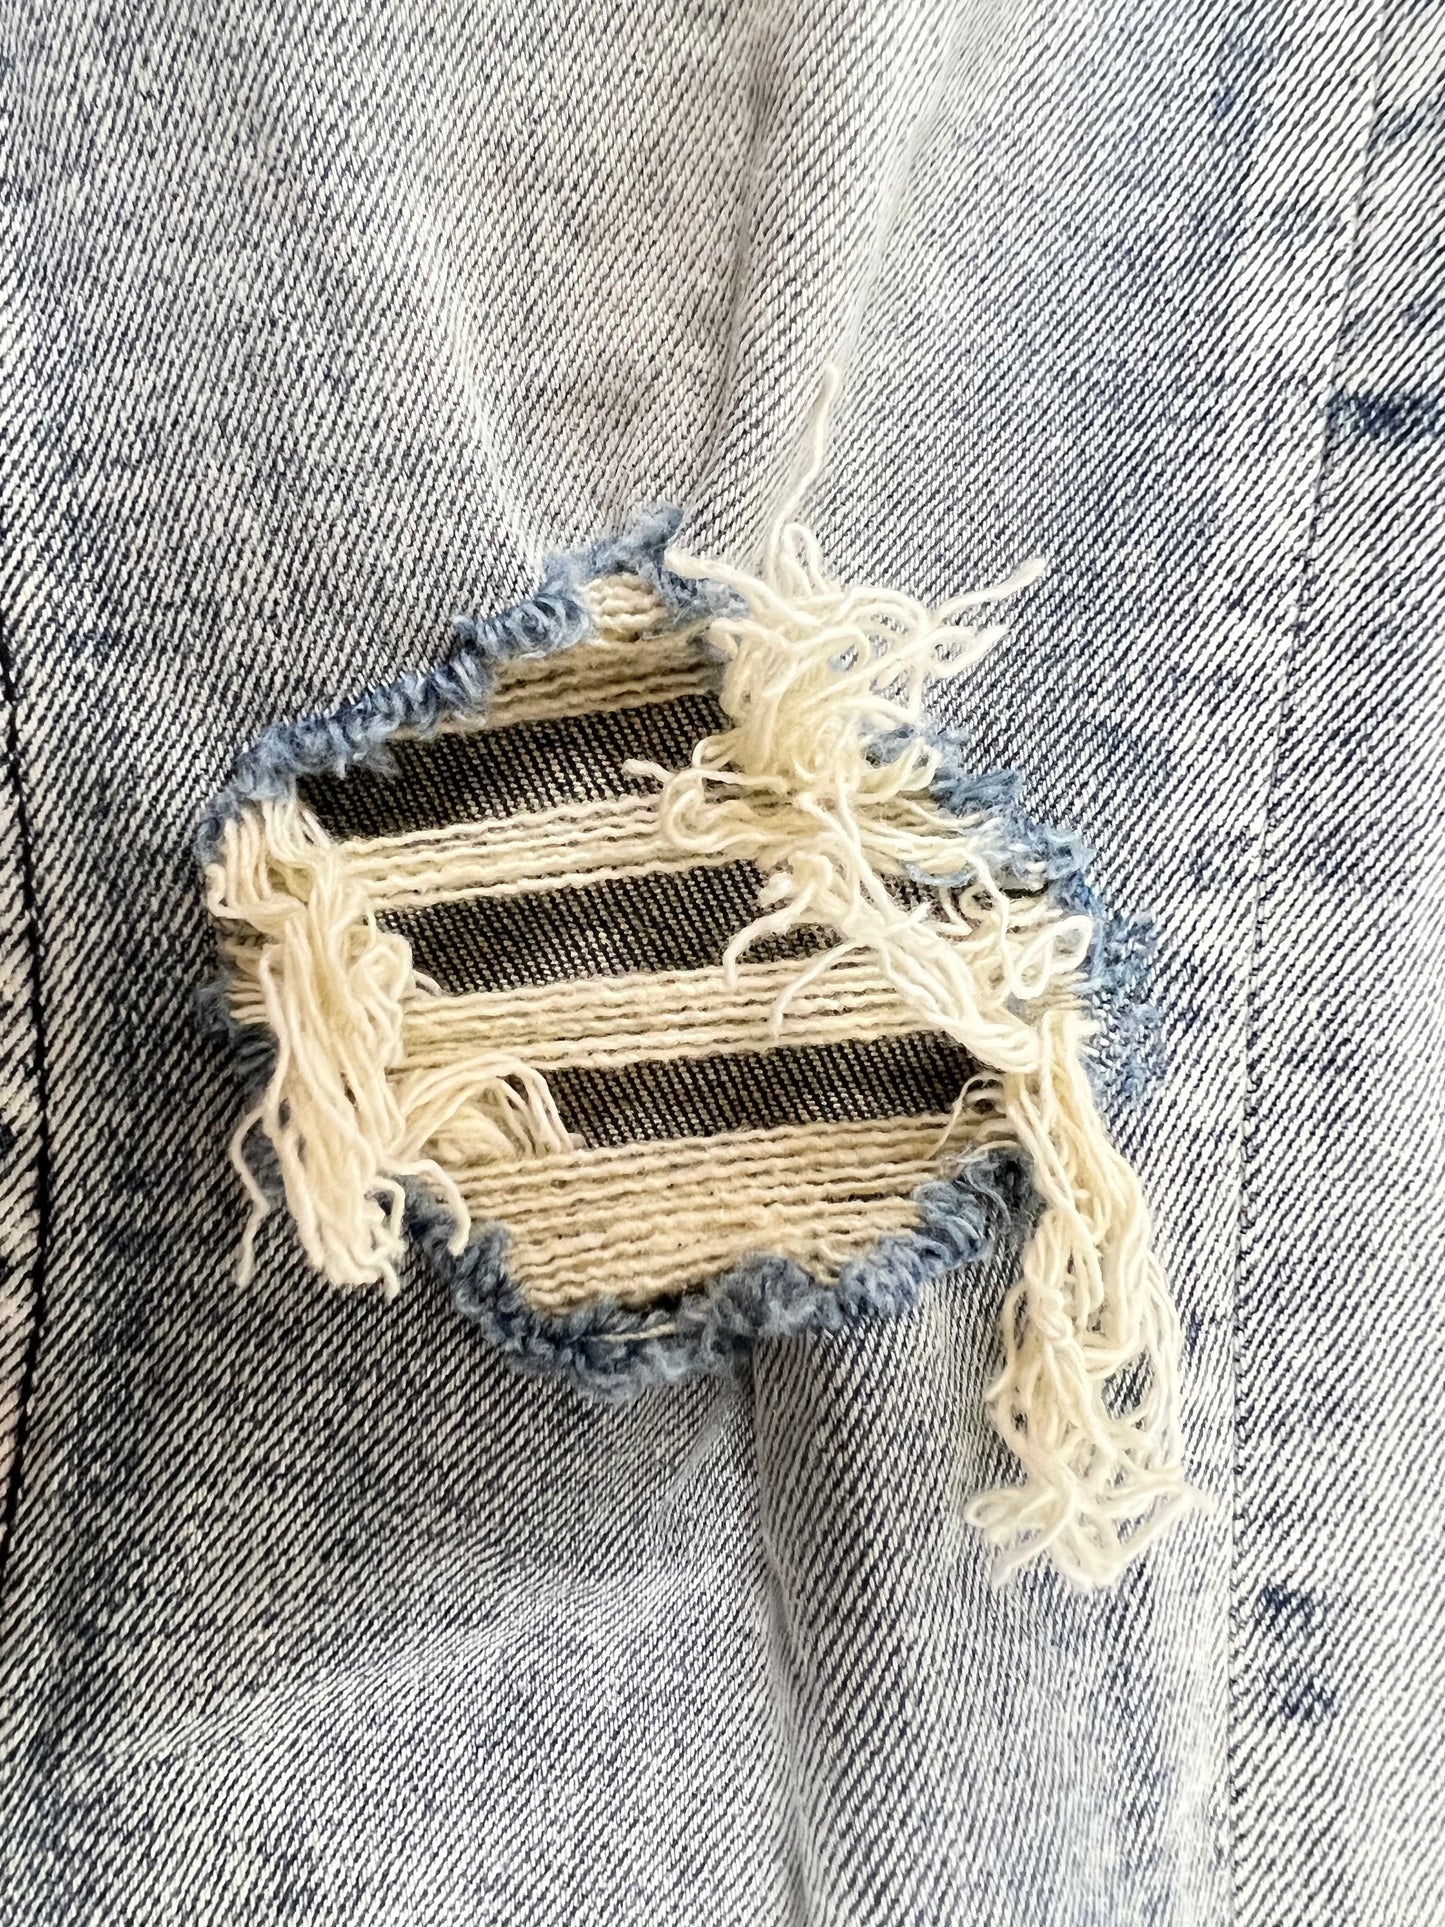 A close up of a light blue, ripped hole in a Ksubi Van Winkle Round Three denim jacket.